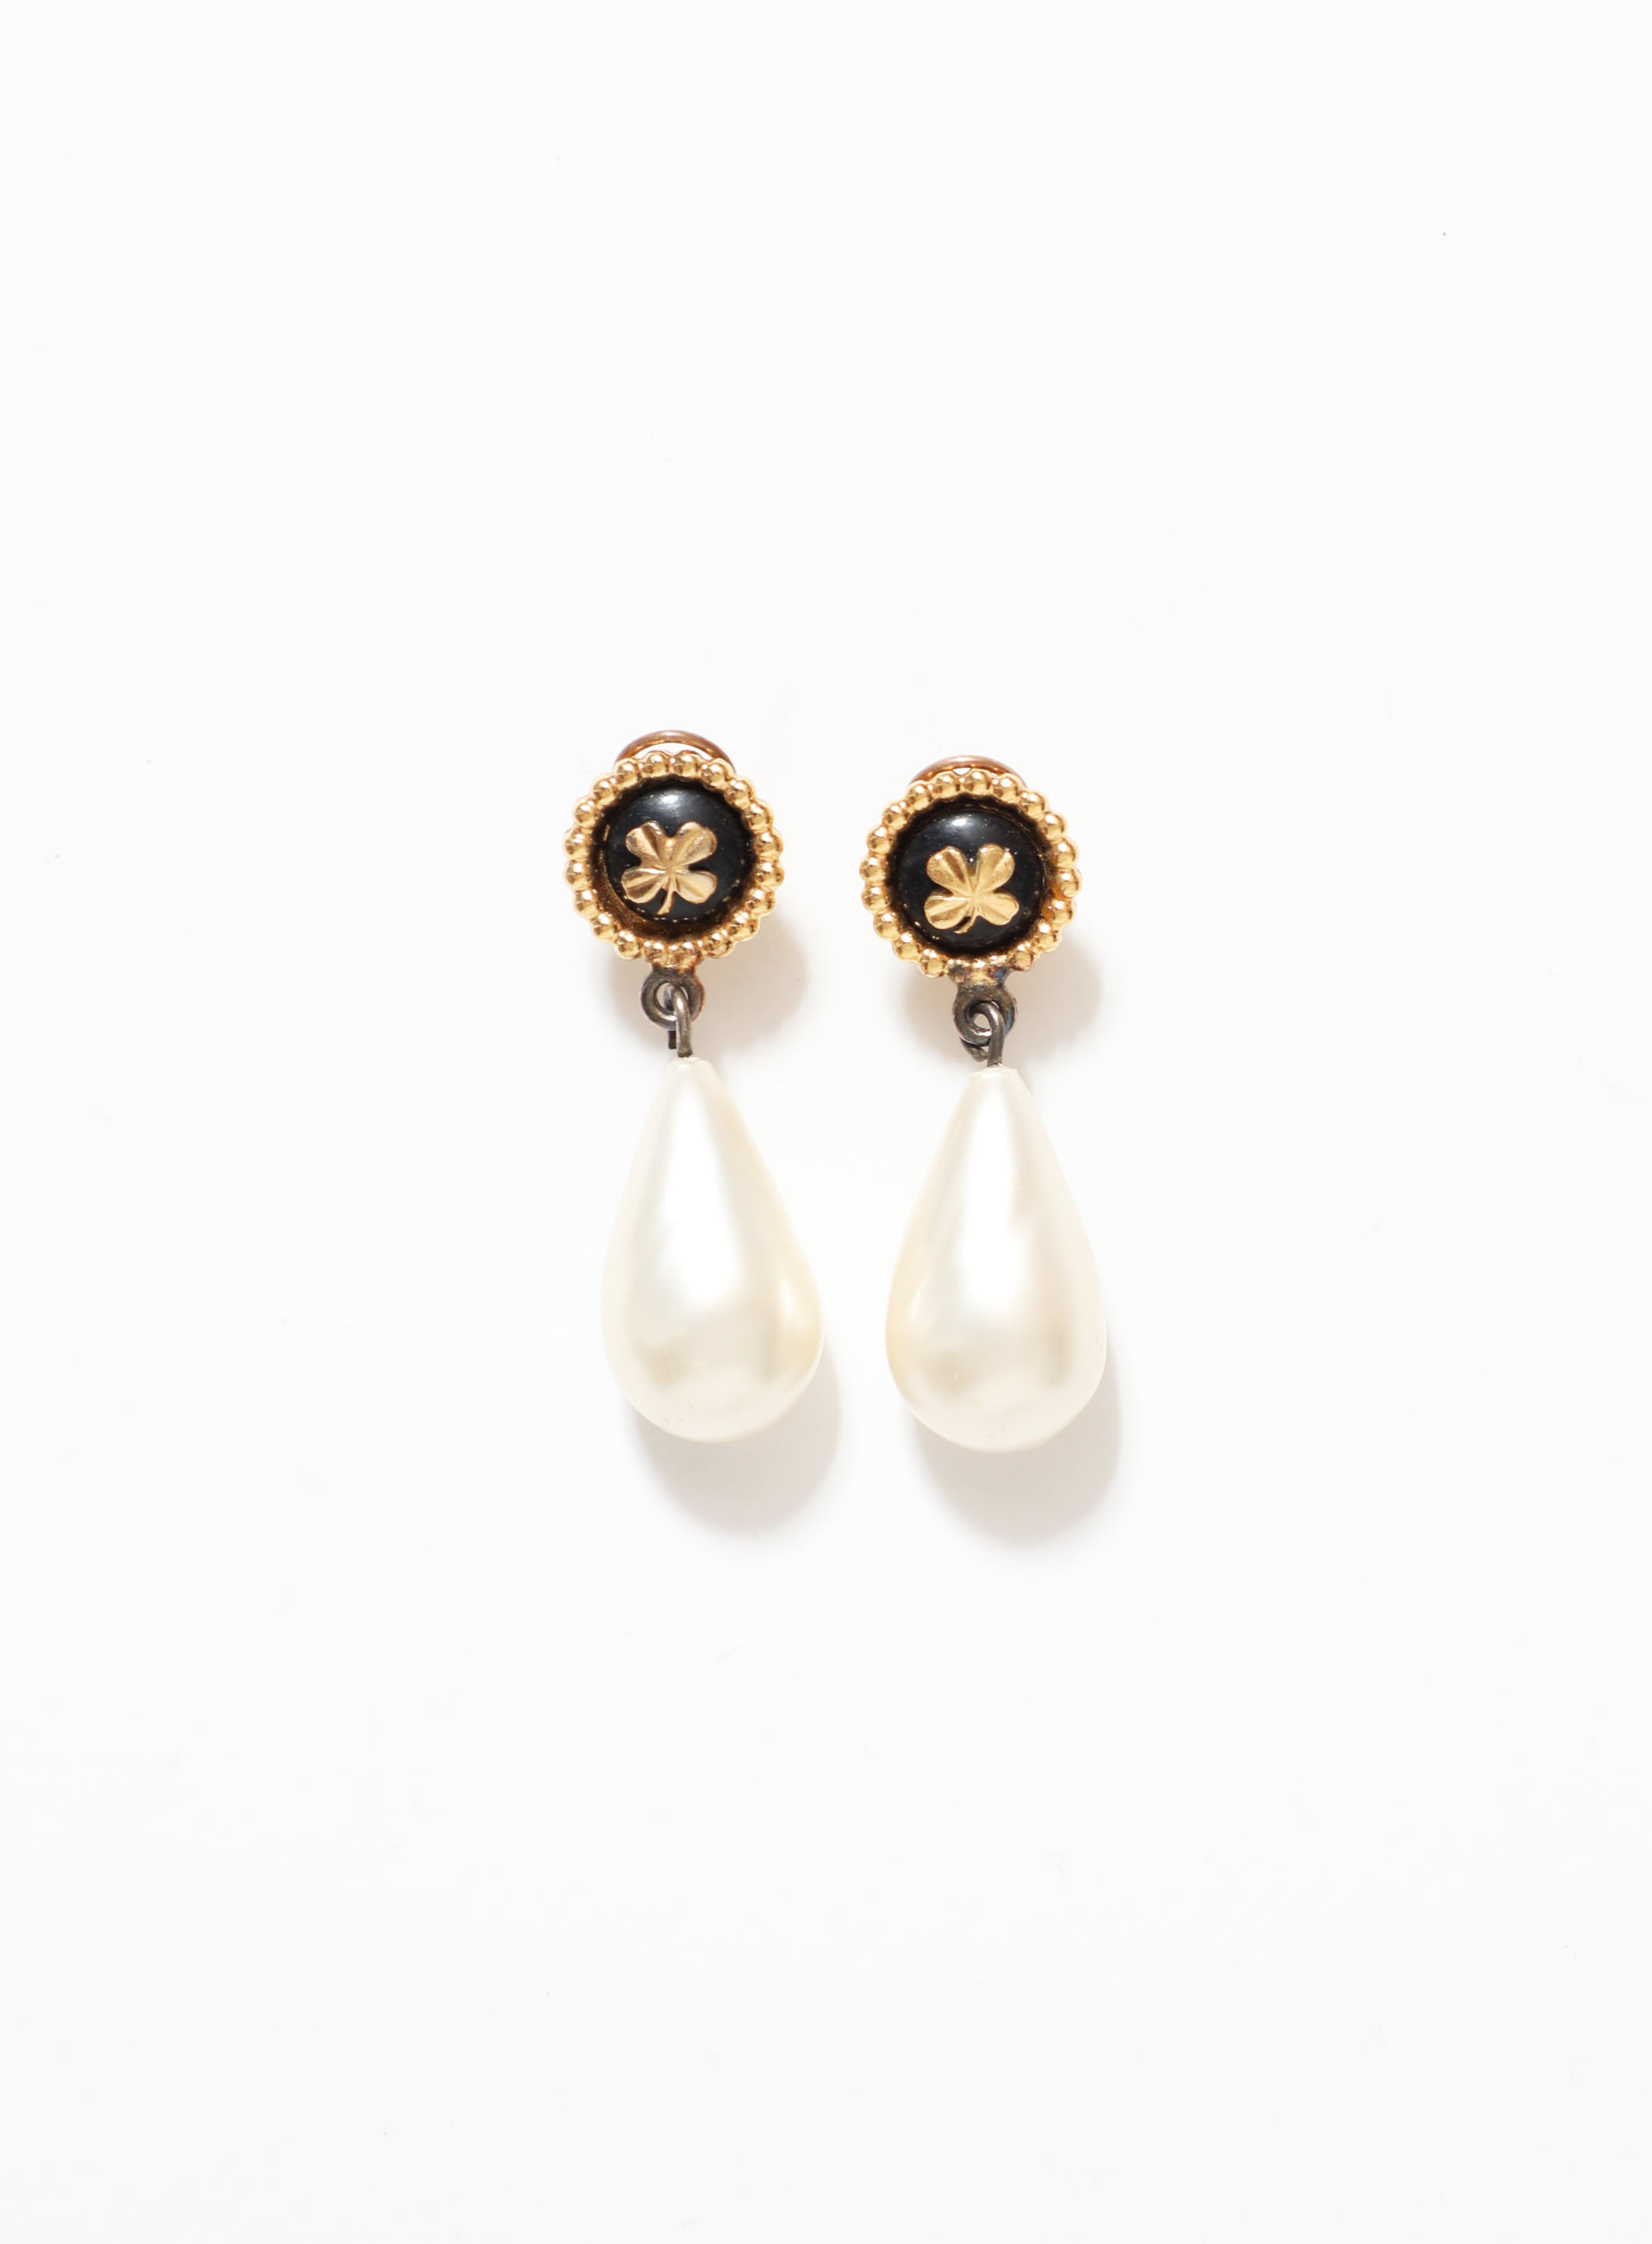 CHANEL, Jewelry, Chanel 22b Cc Logo Gold Black Pearly White Earrings  Brand New With Tag